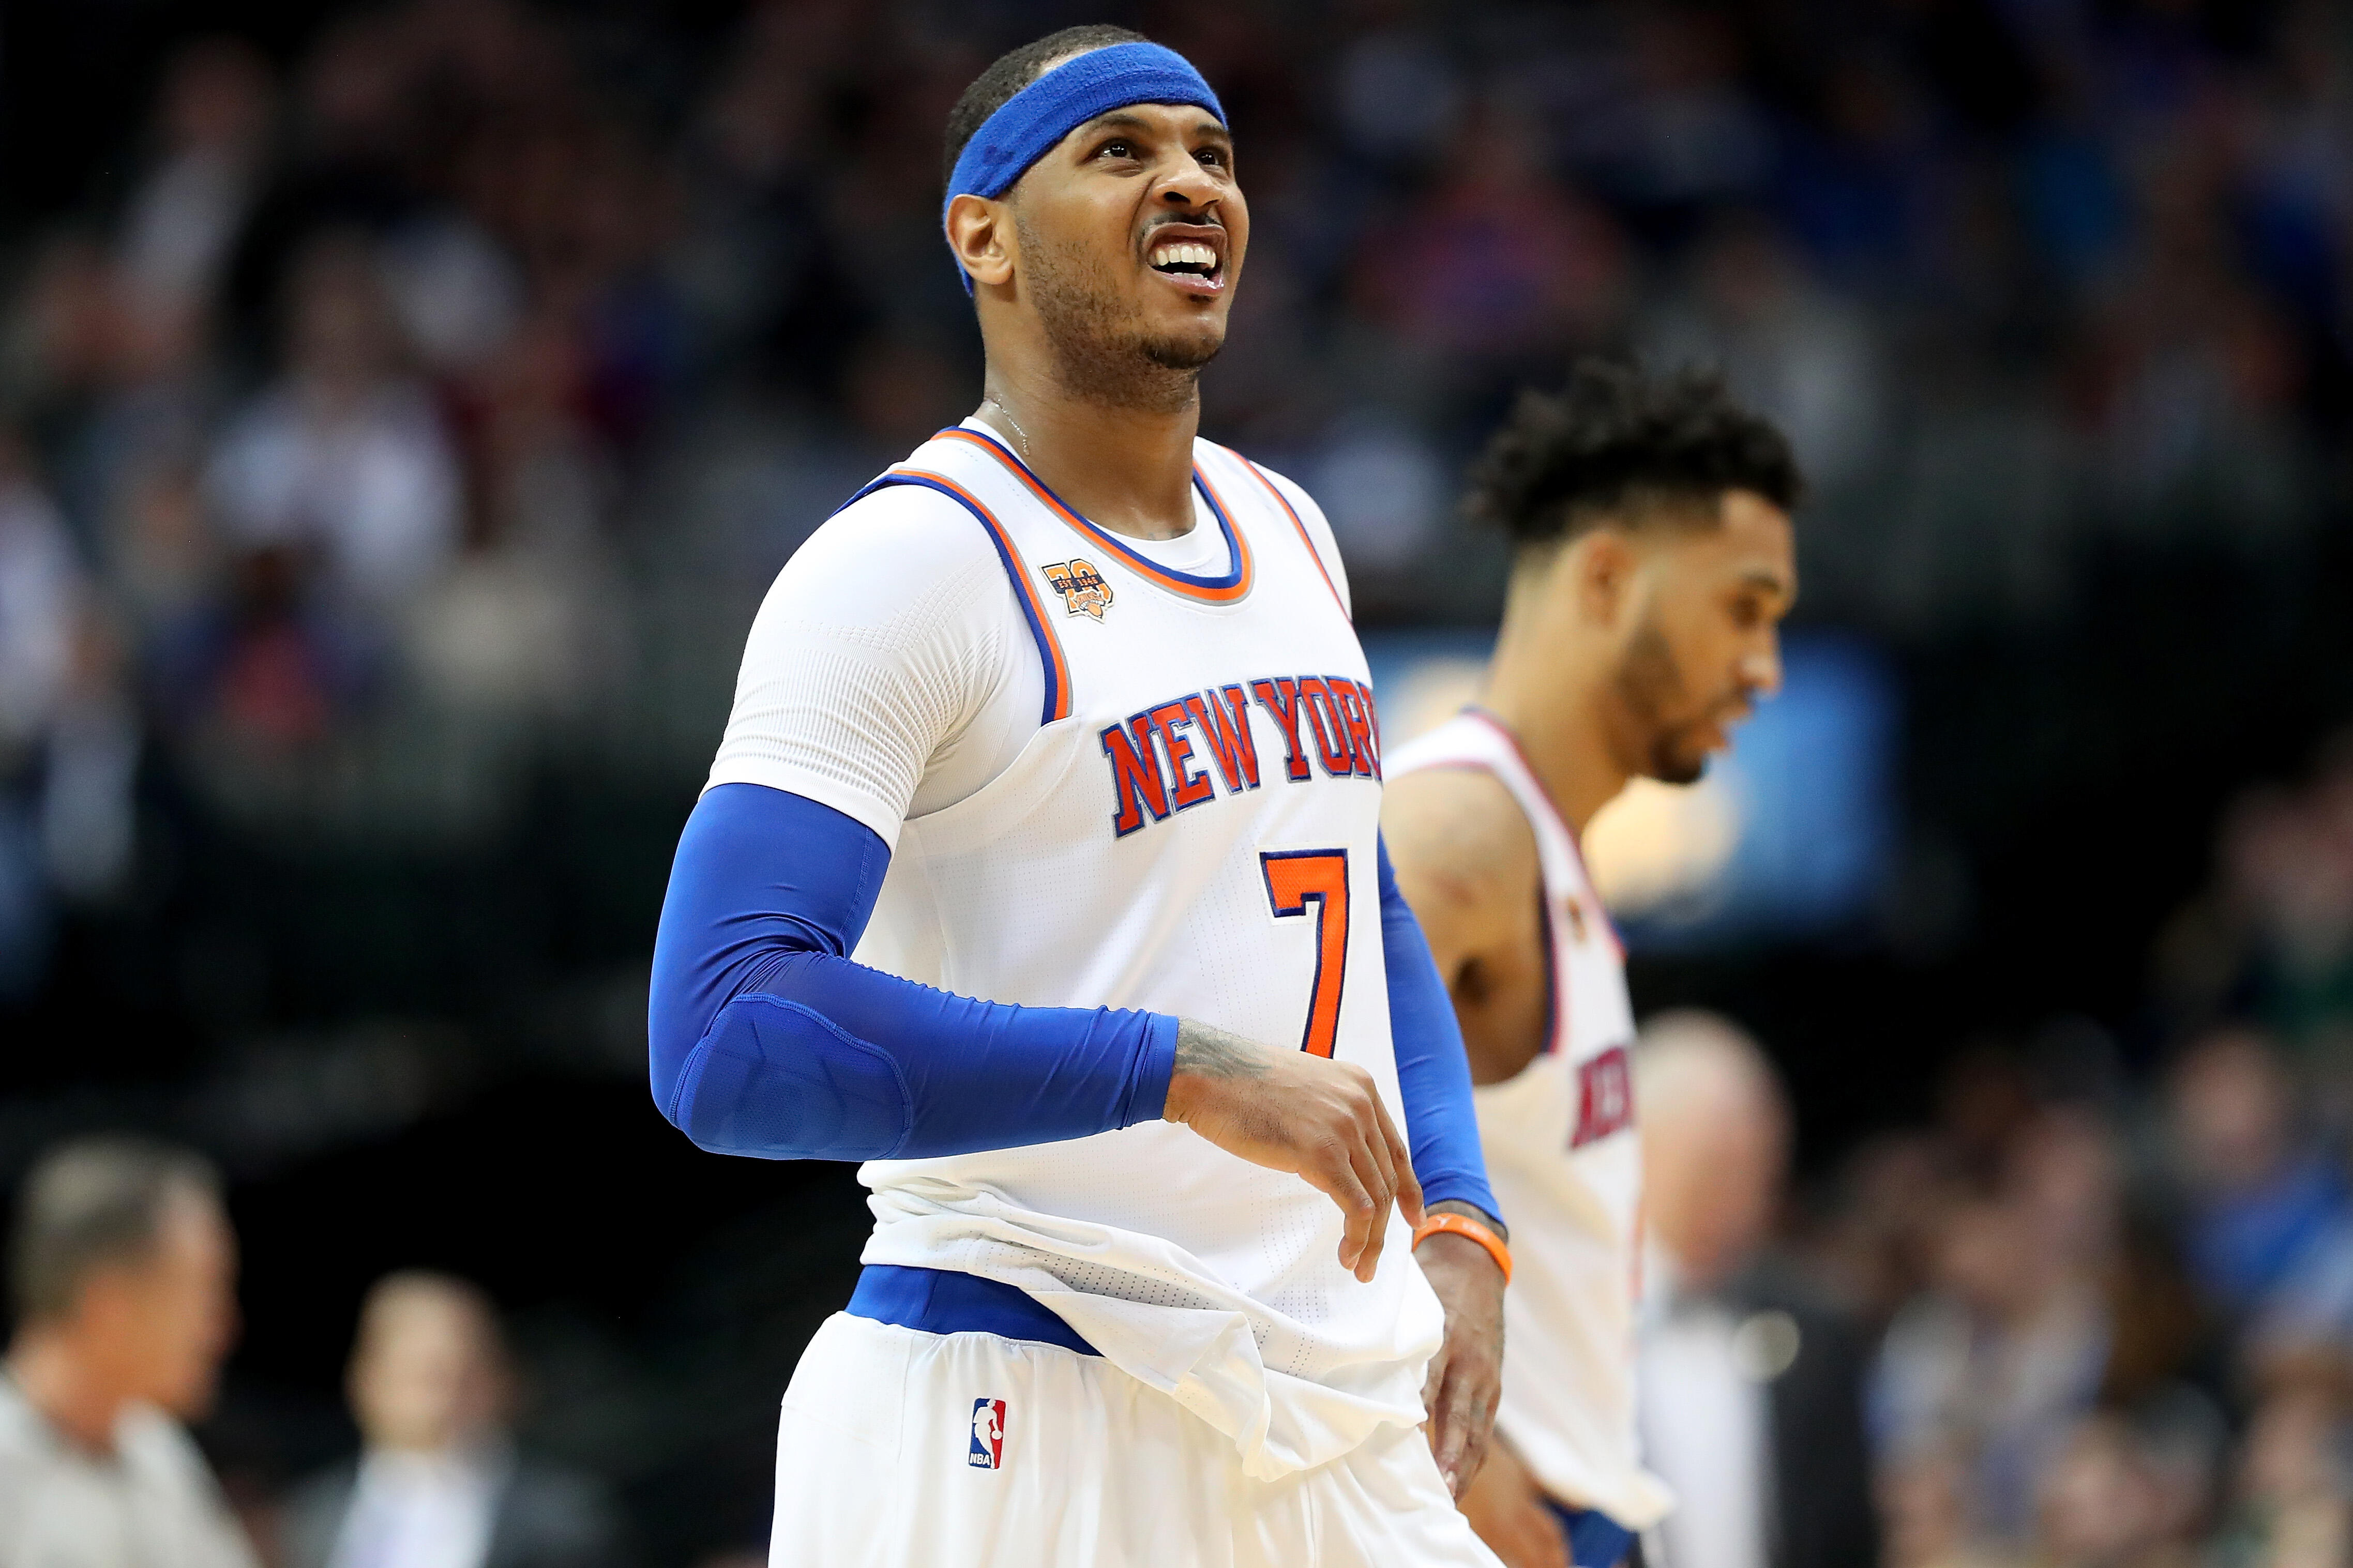 DALLAS, TX - JANUARY 25:  Carmelo Anthony #7 of the New York Knicks reacts against the Dallas Mavericks in the second half at American Airlines Center on January 25, 2017 in Dallas, Texas. NOTE TO USER: User expressly acknowledges and agrees that, by down